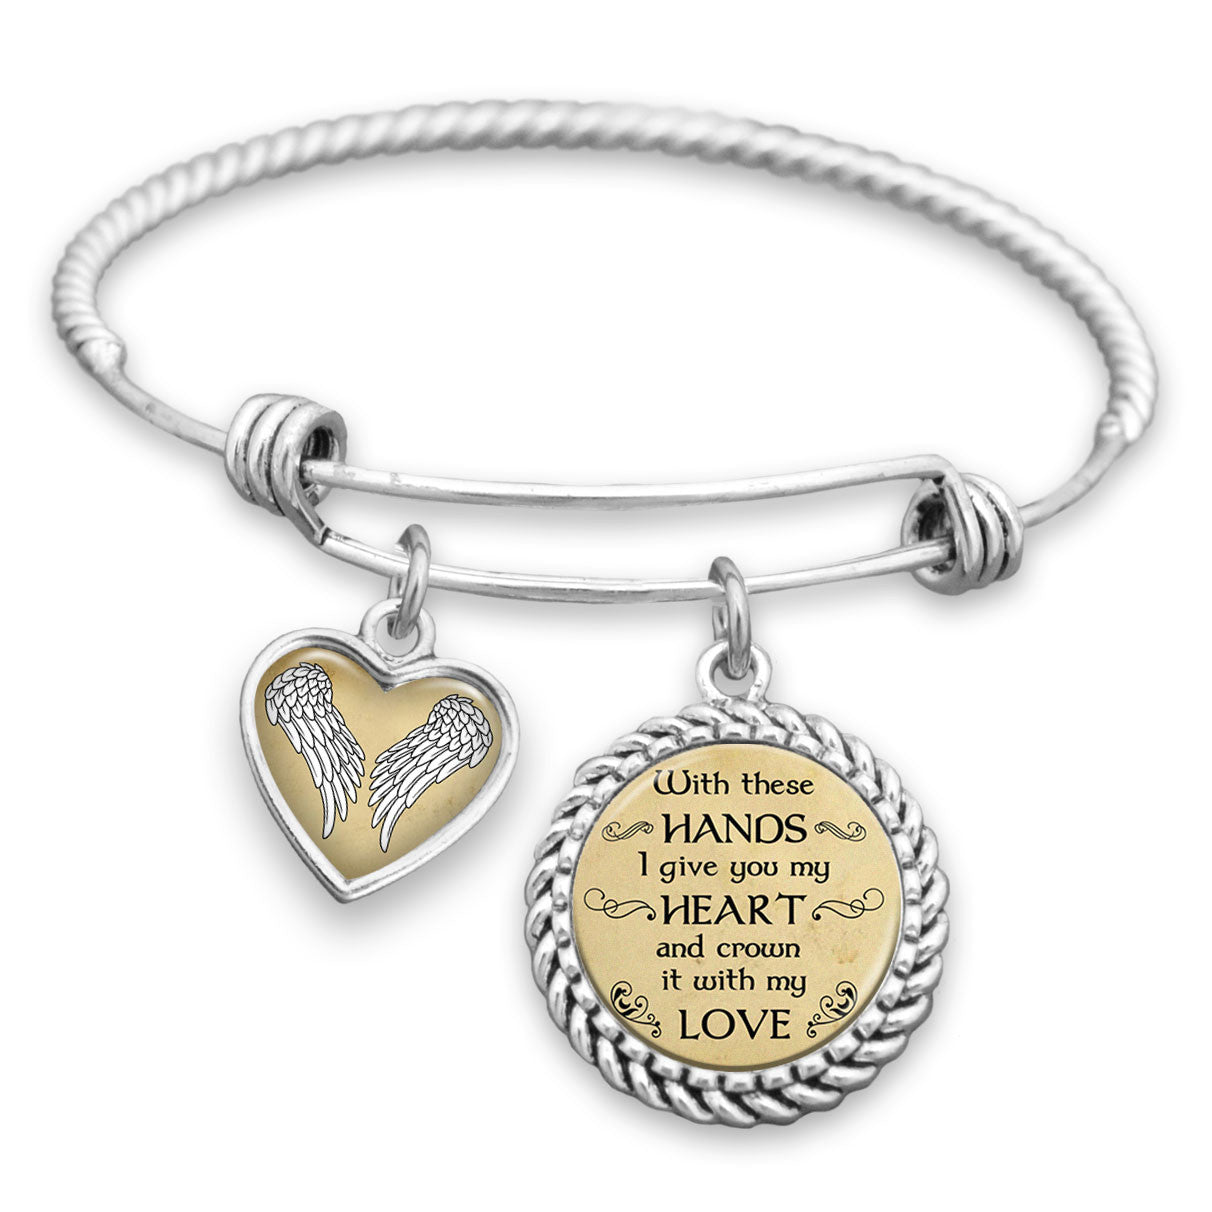 With These Hands I Give You My Heart Charm Bracelet